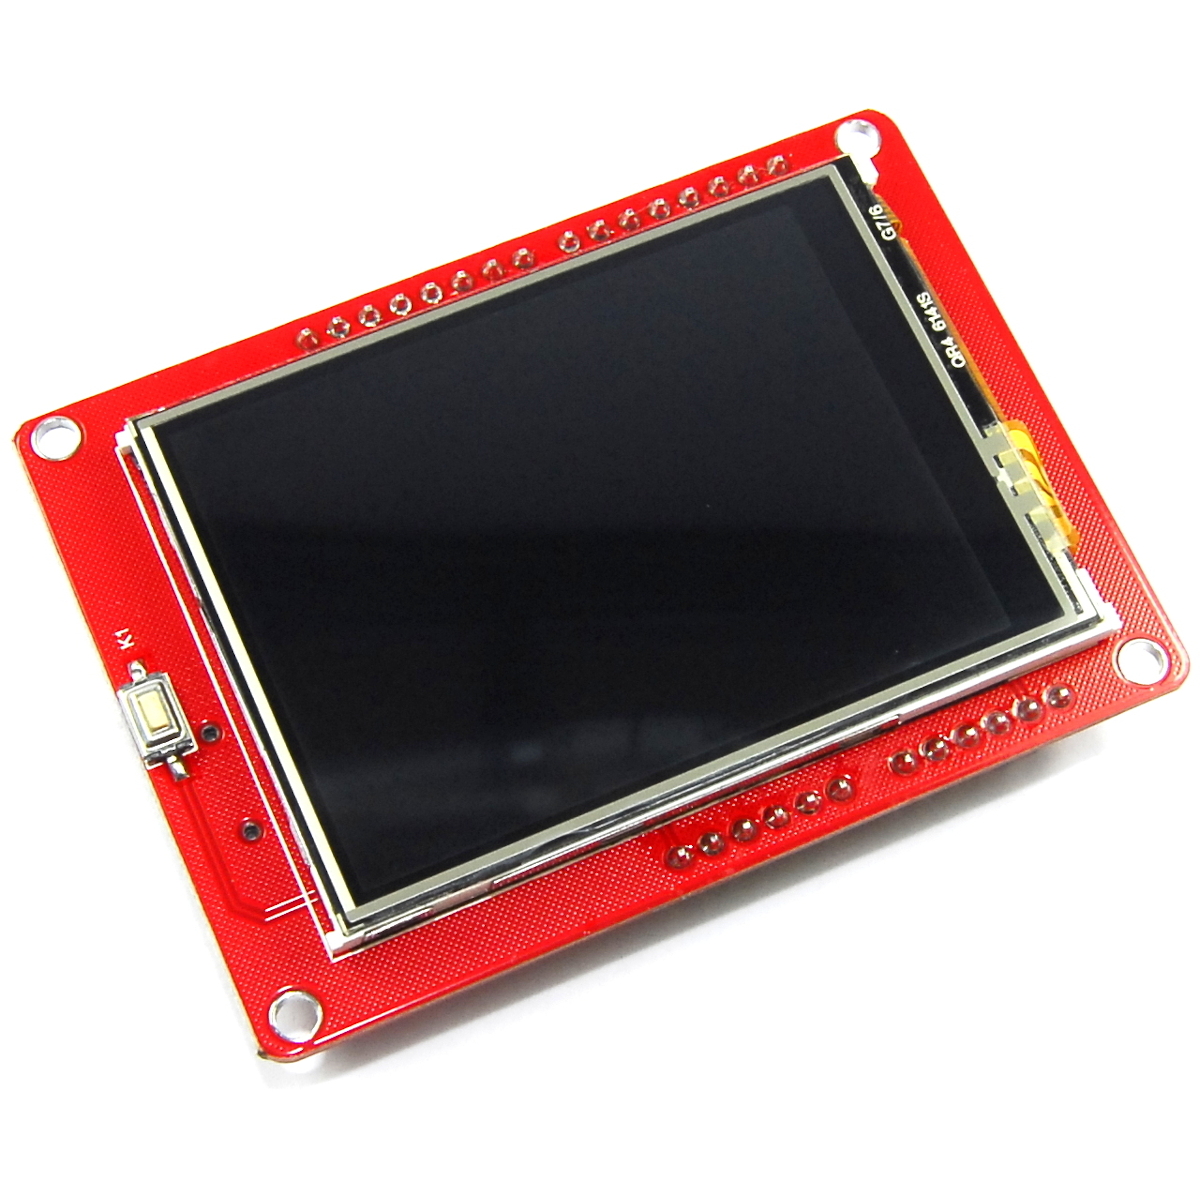 UNO 240x320 2_4 inch Touch LCD Shield Keyes Red Image 1